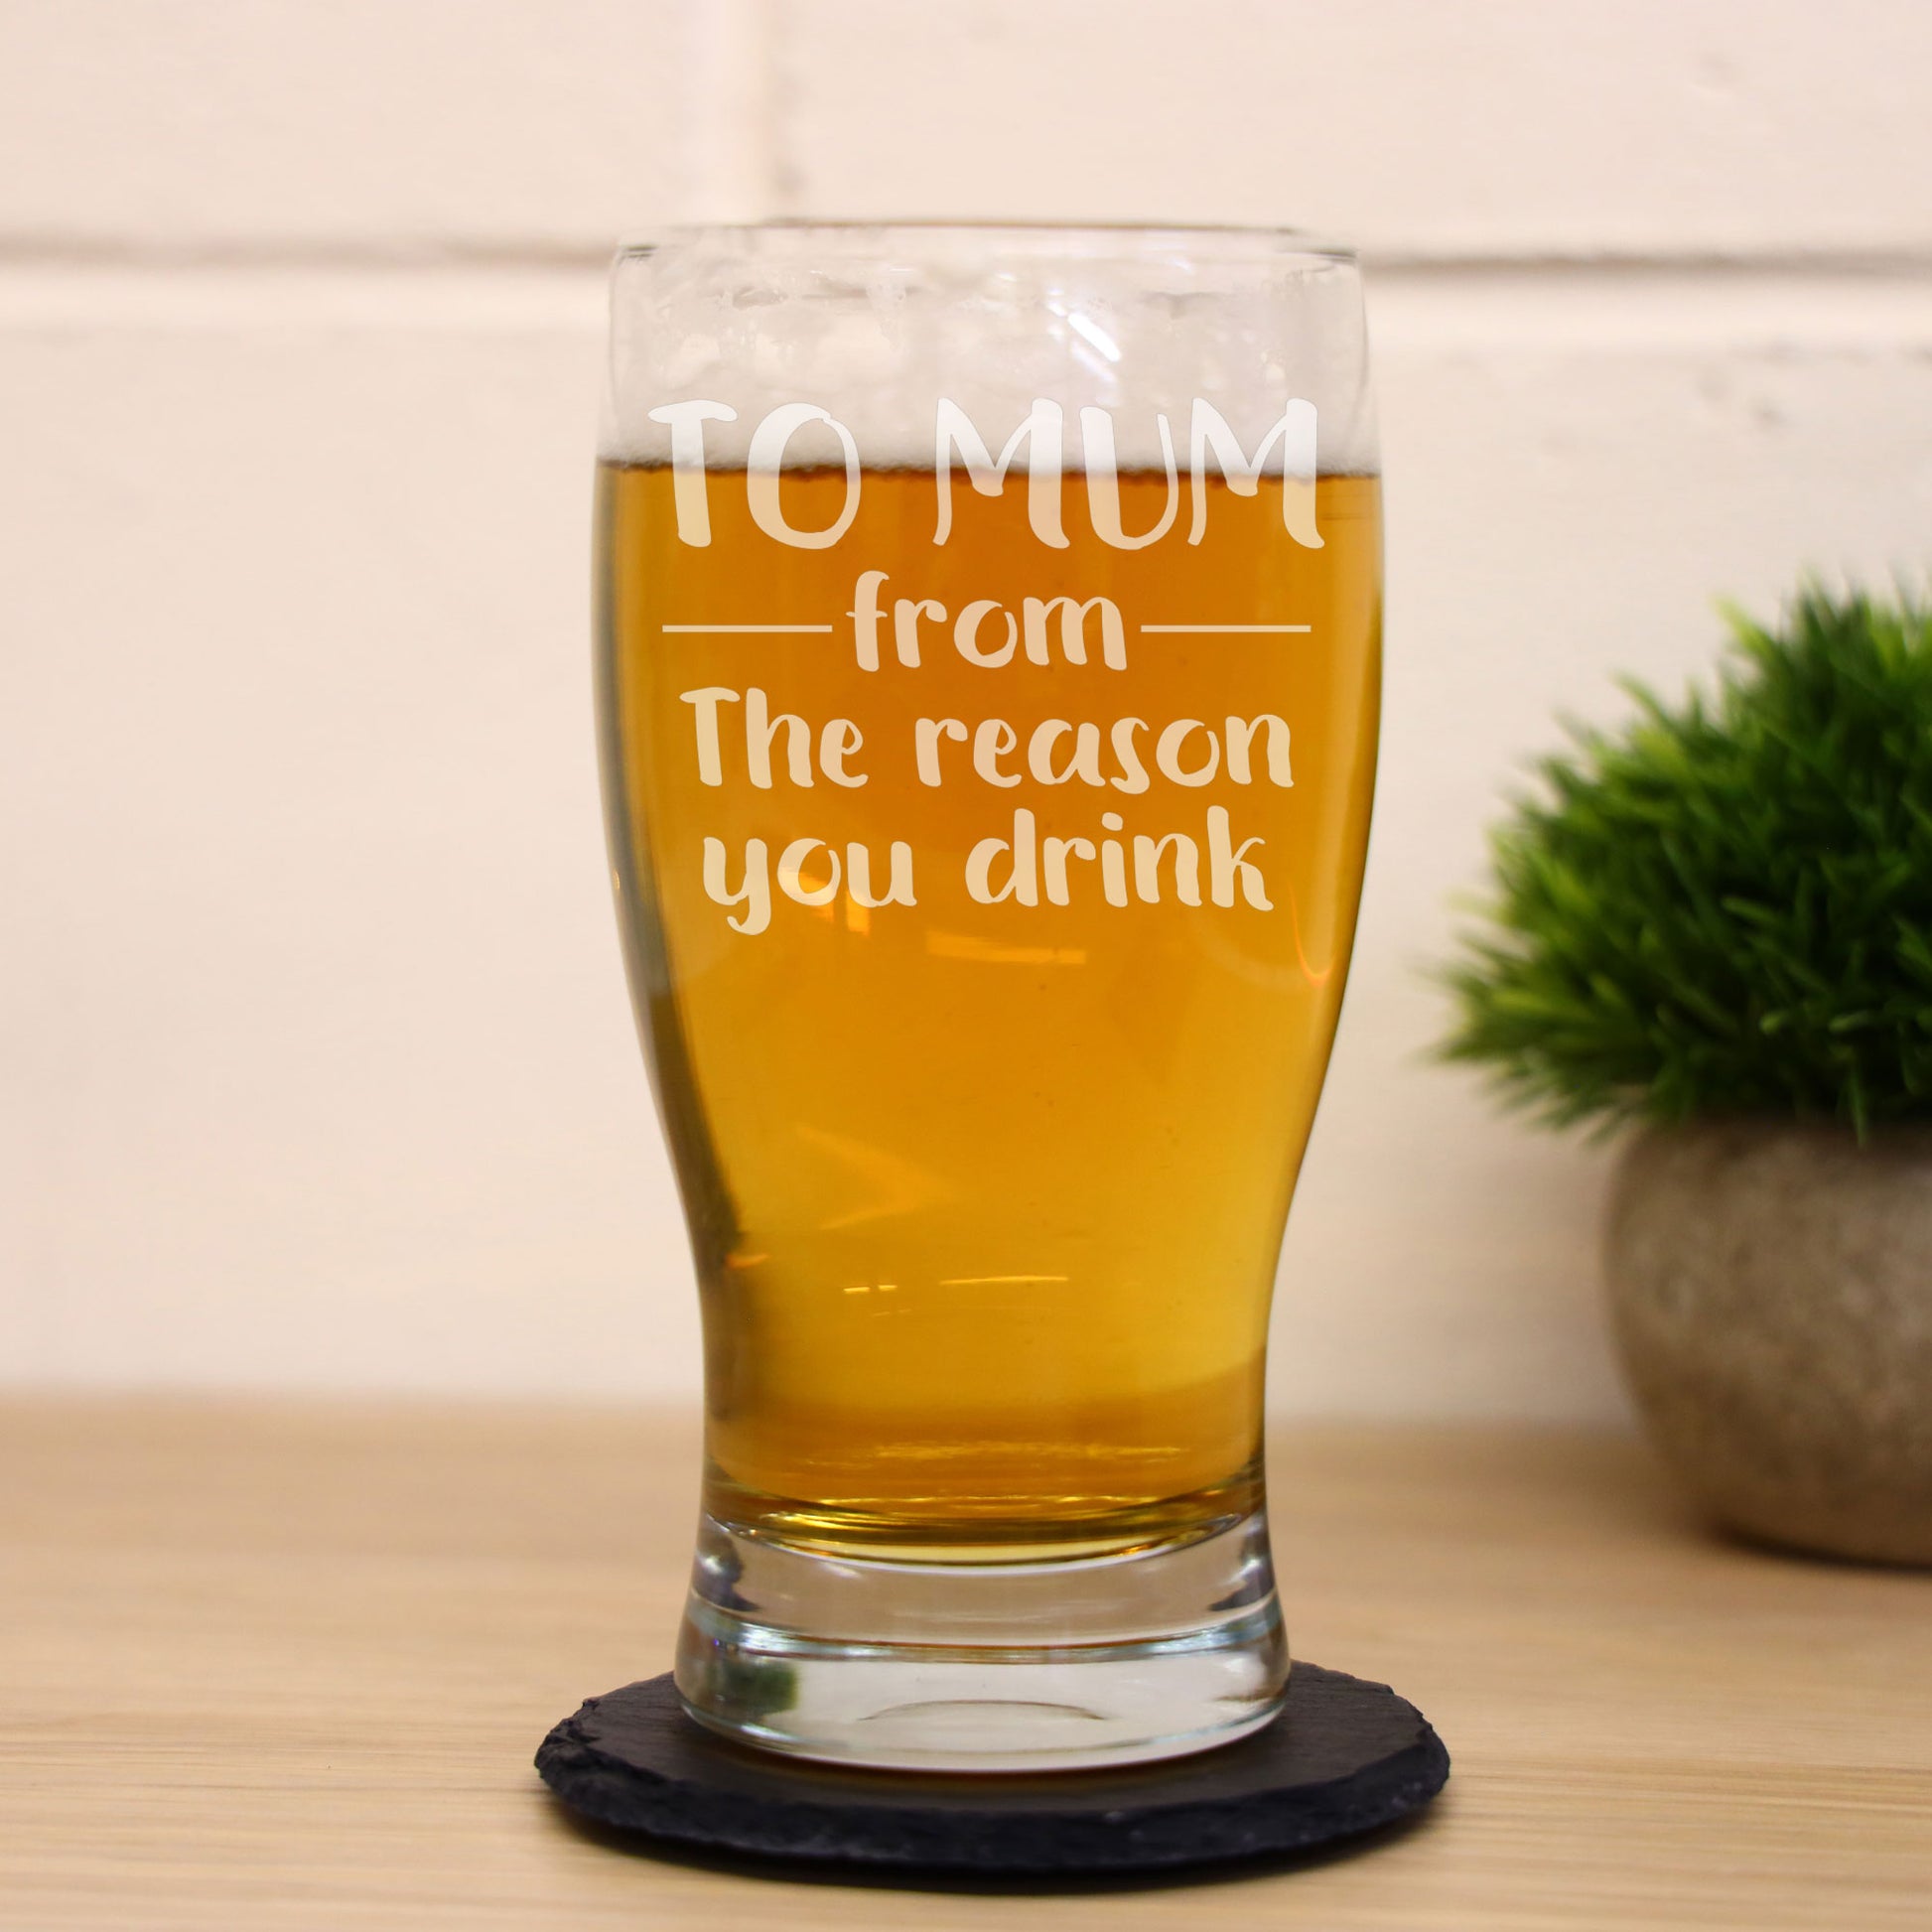 To Mum From The Reason You Drink Engraved Pint Glass  - Always Looking Good -   